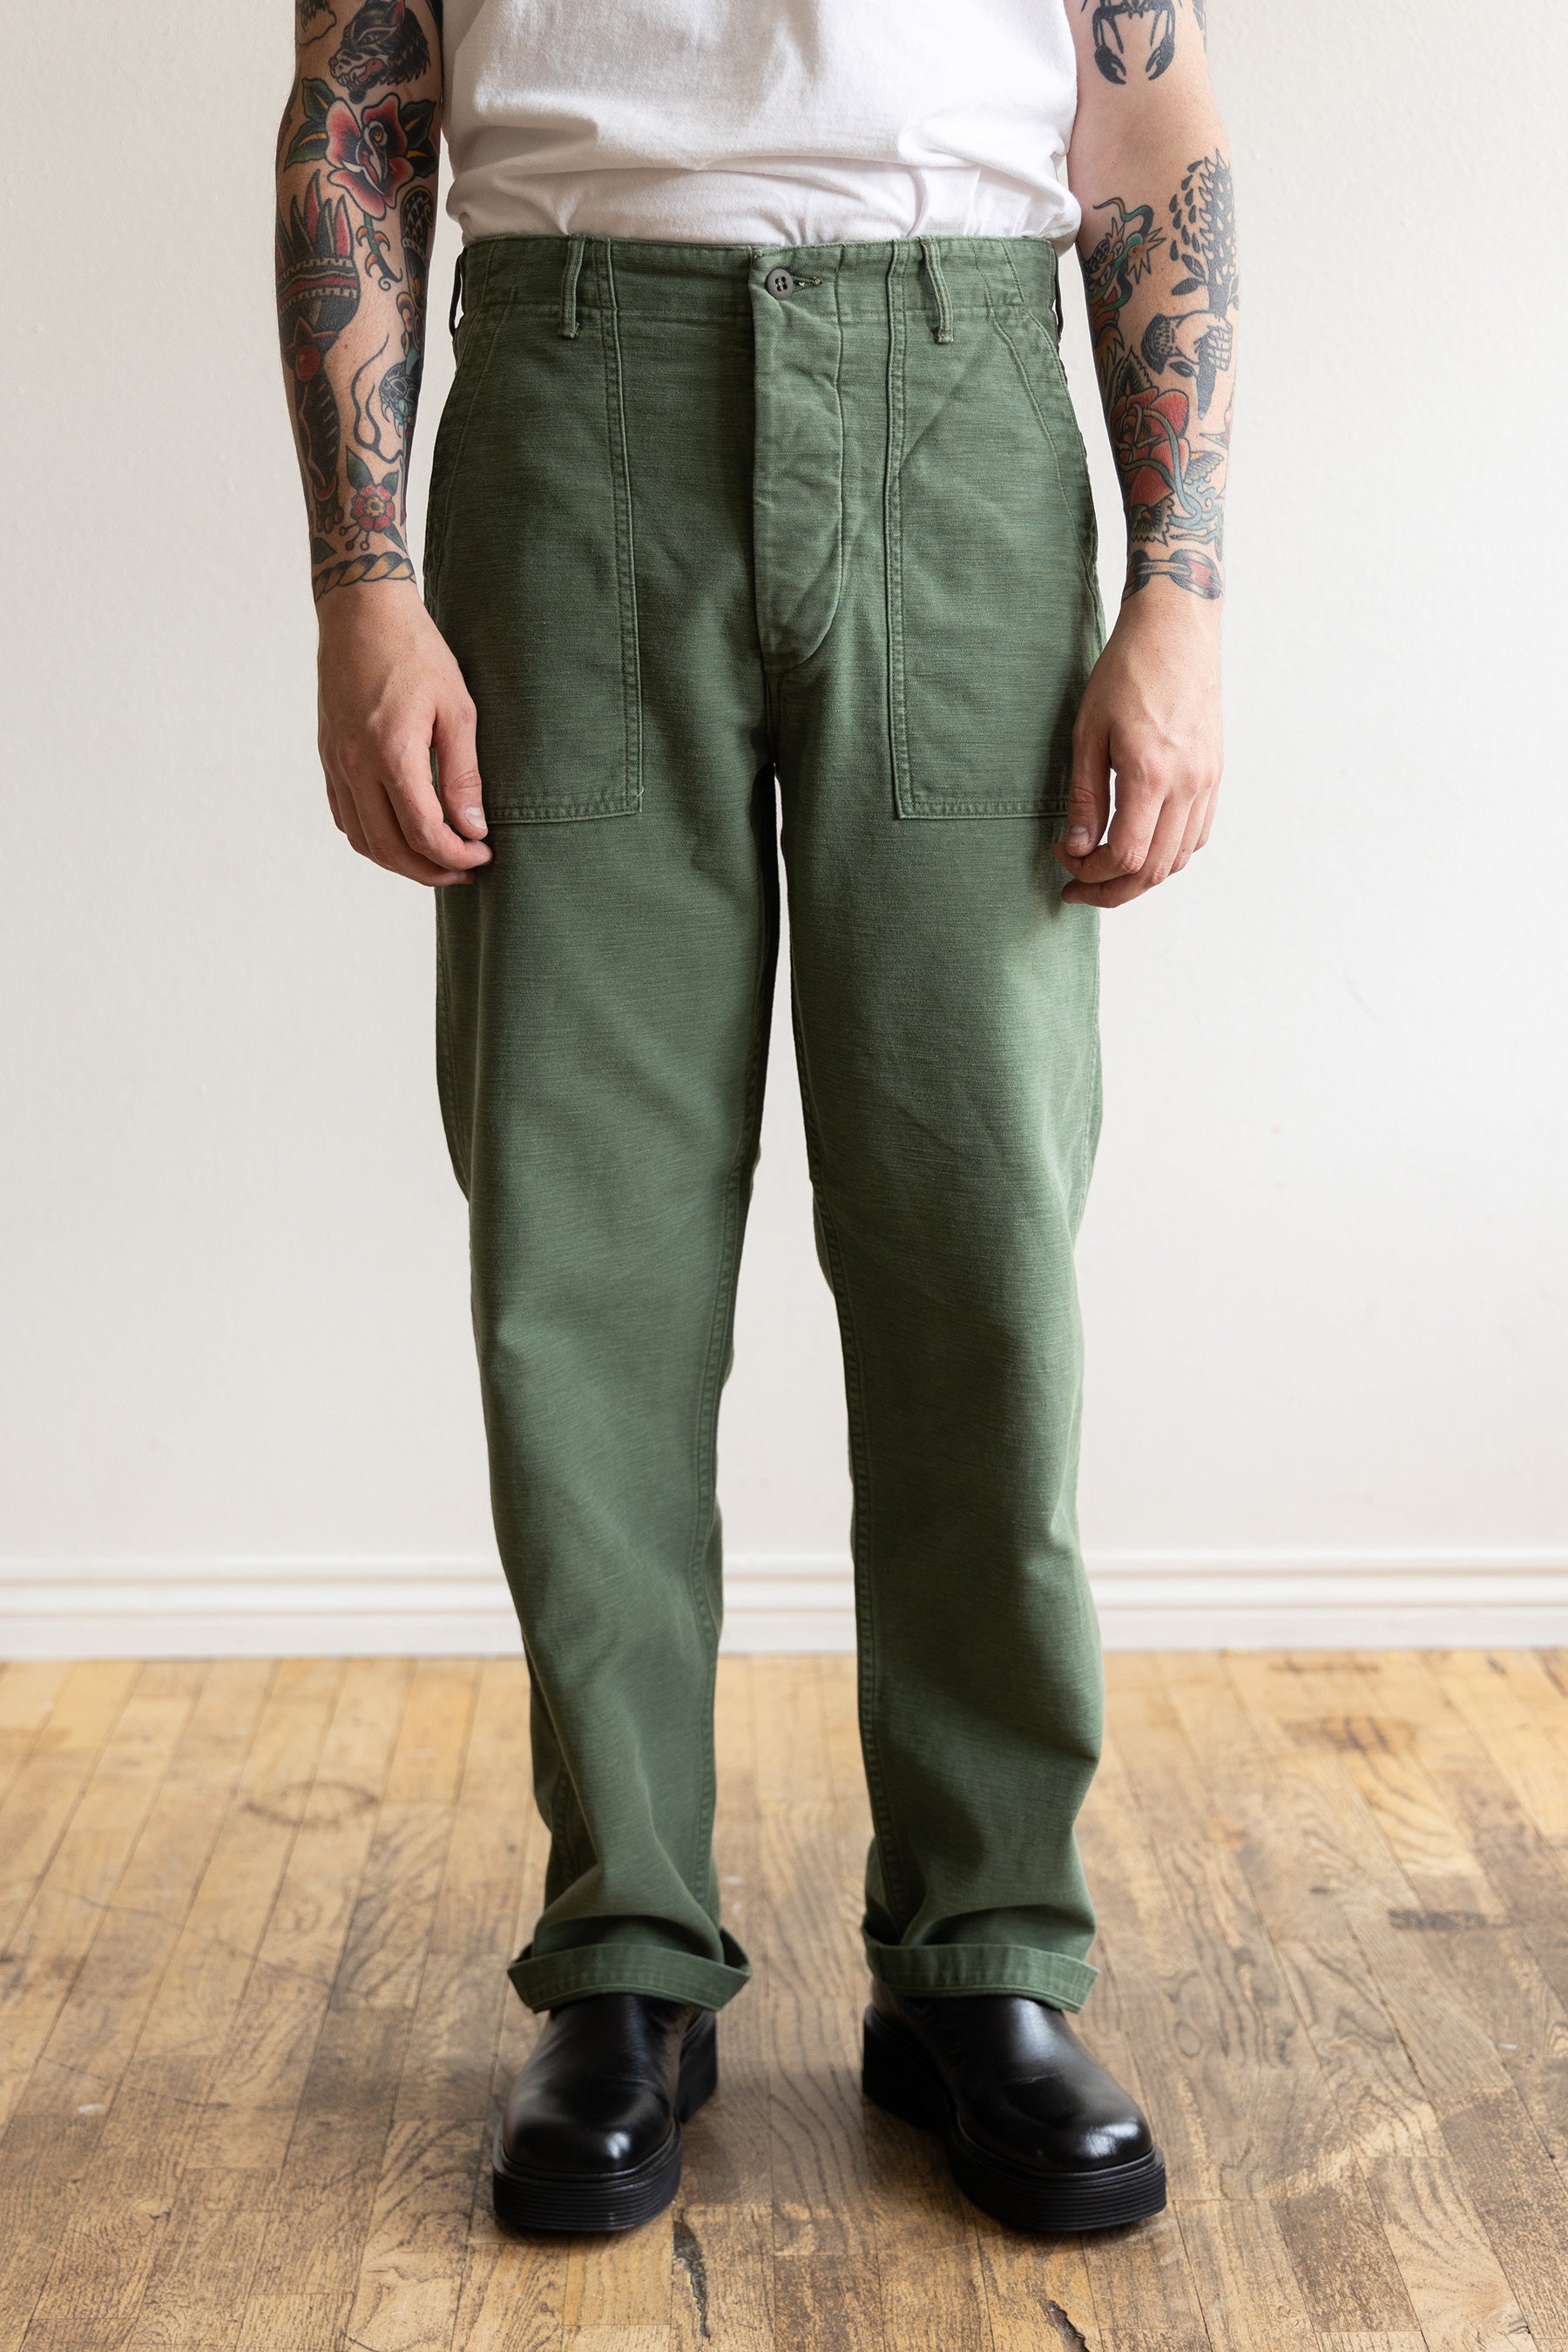 OrSlow US Army Fatigue Pants Regular Fit, Green Used